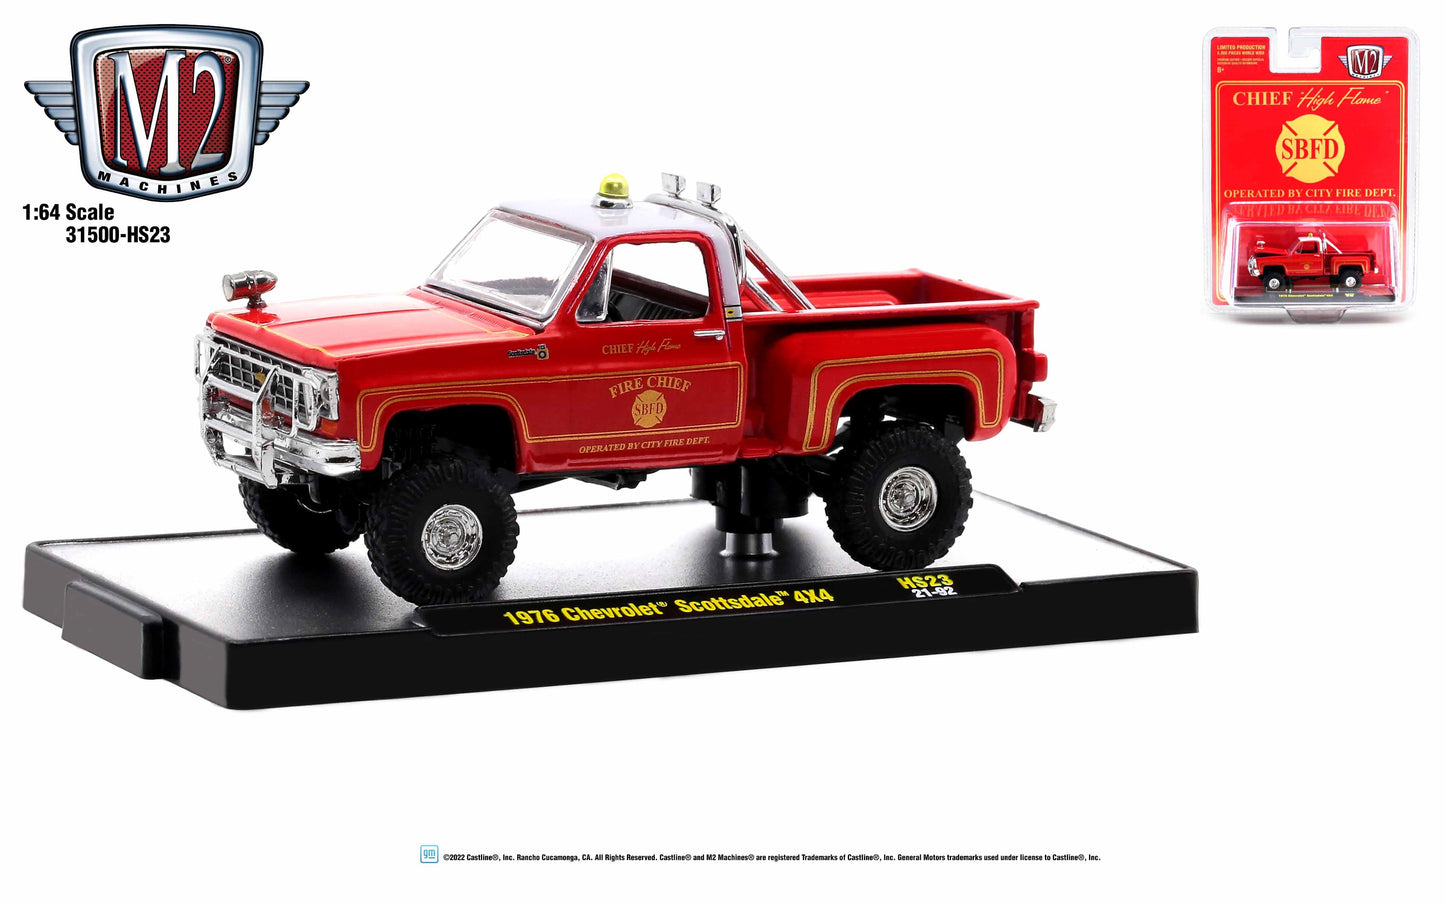 2022 M2 MACHINES 1976  Chevrolet Scottsdale Fire Truck Hobby Exclusive HS23